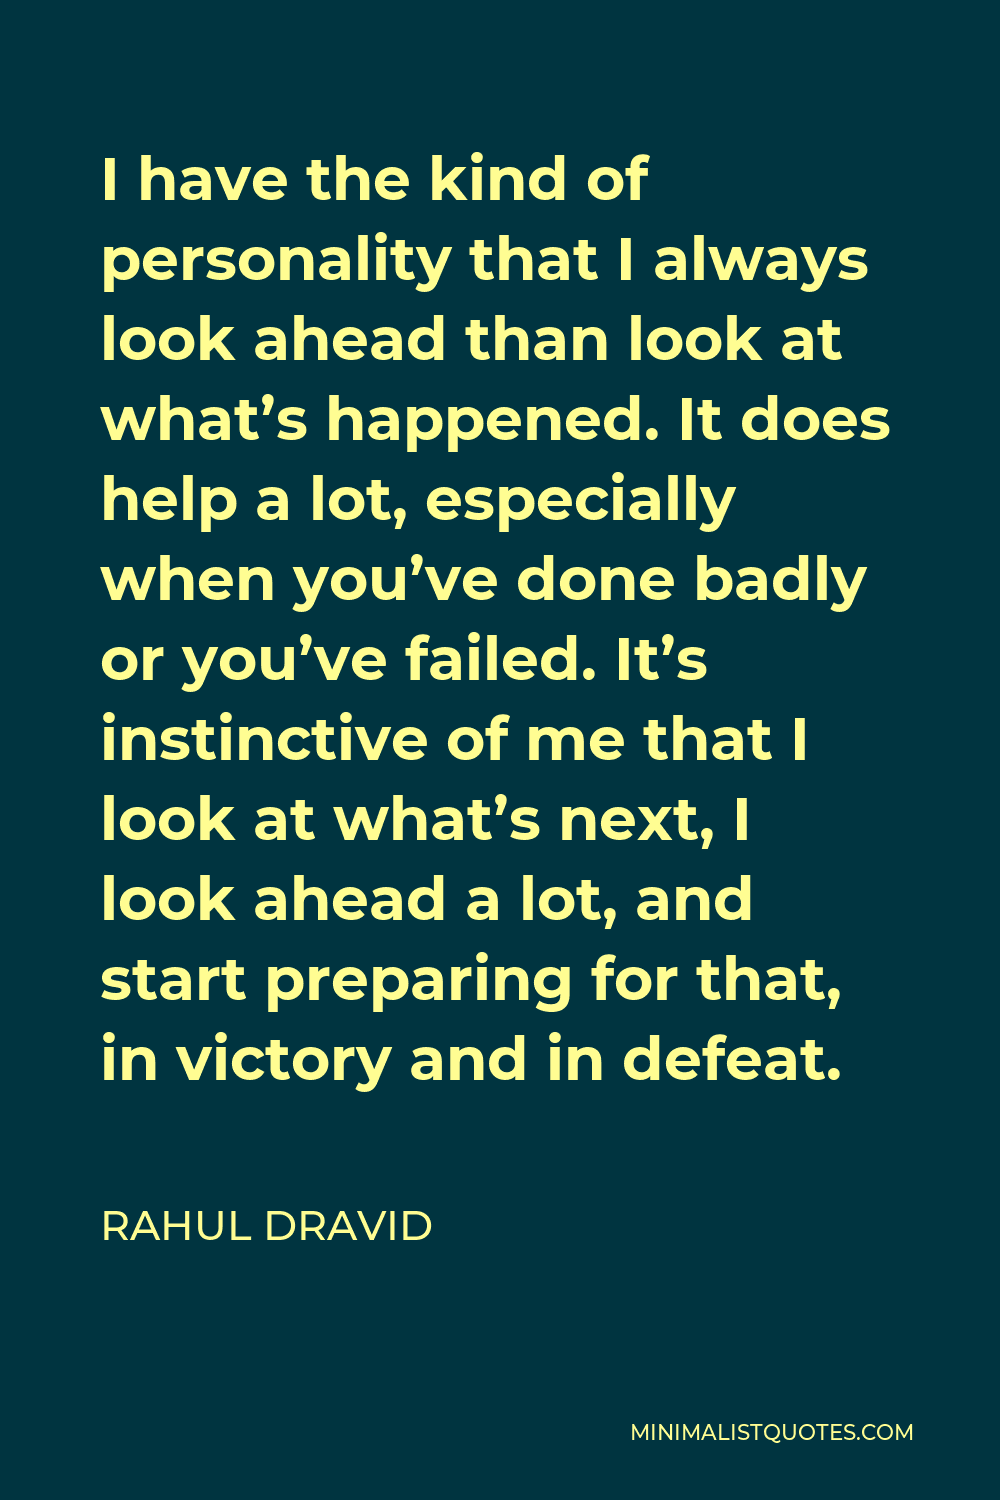 Rahul Dravid Quote - I have the kind of personality that I always look ahead than look at what’s happened. It does help a lot, especially when you’ve done badly or you’ve failed. It’s instinctive of me that I look at what’s next, I look ahead a lot, and start preparing for that, in victory and in defeat.